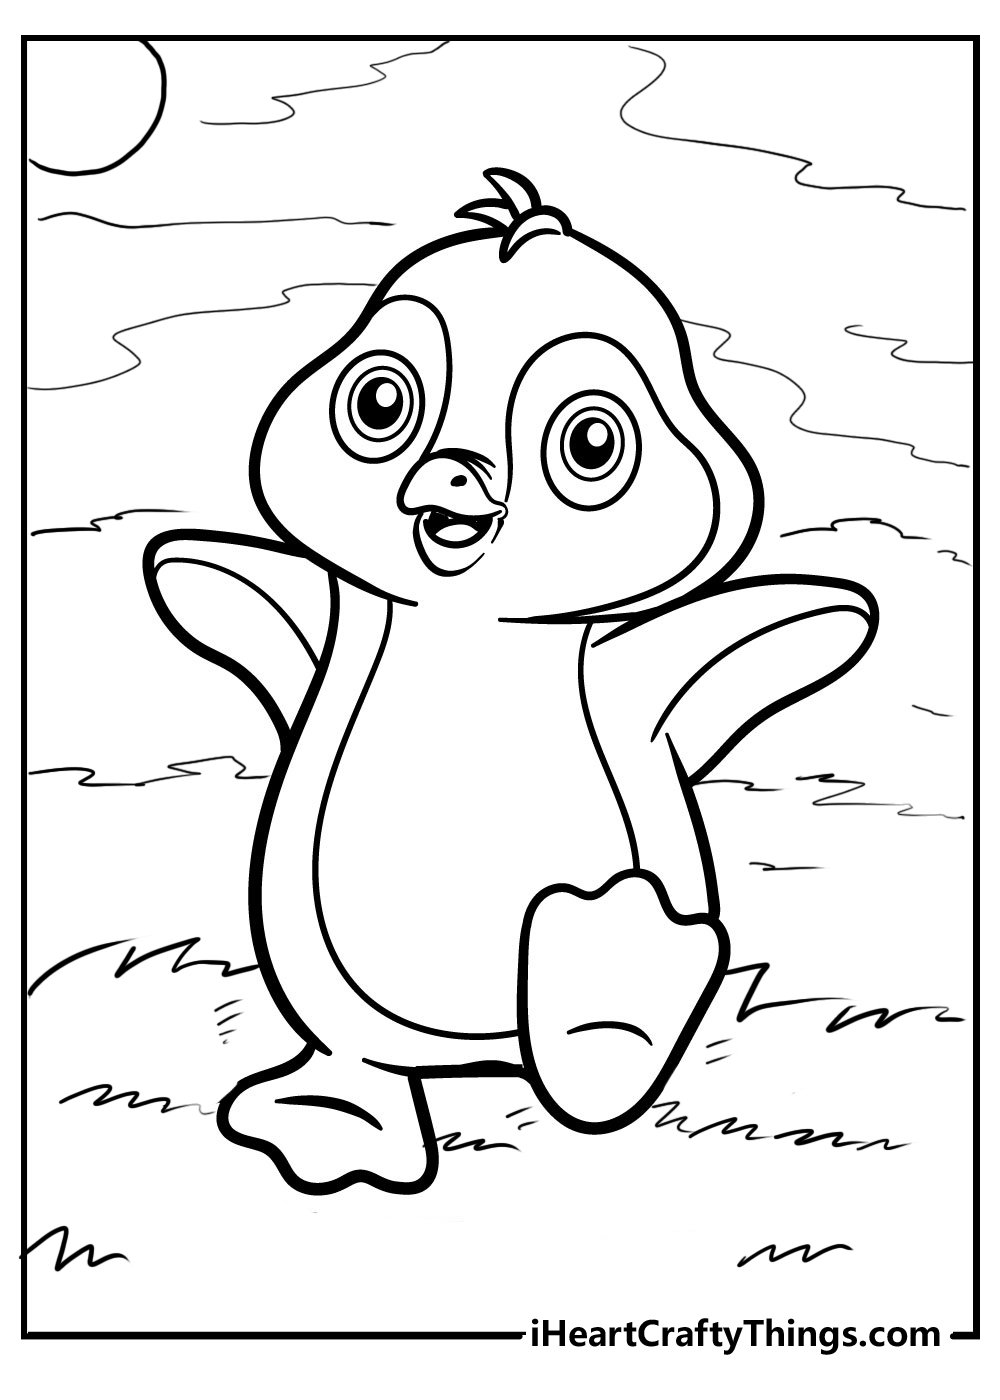 pingu penguin coloring pages for kids free